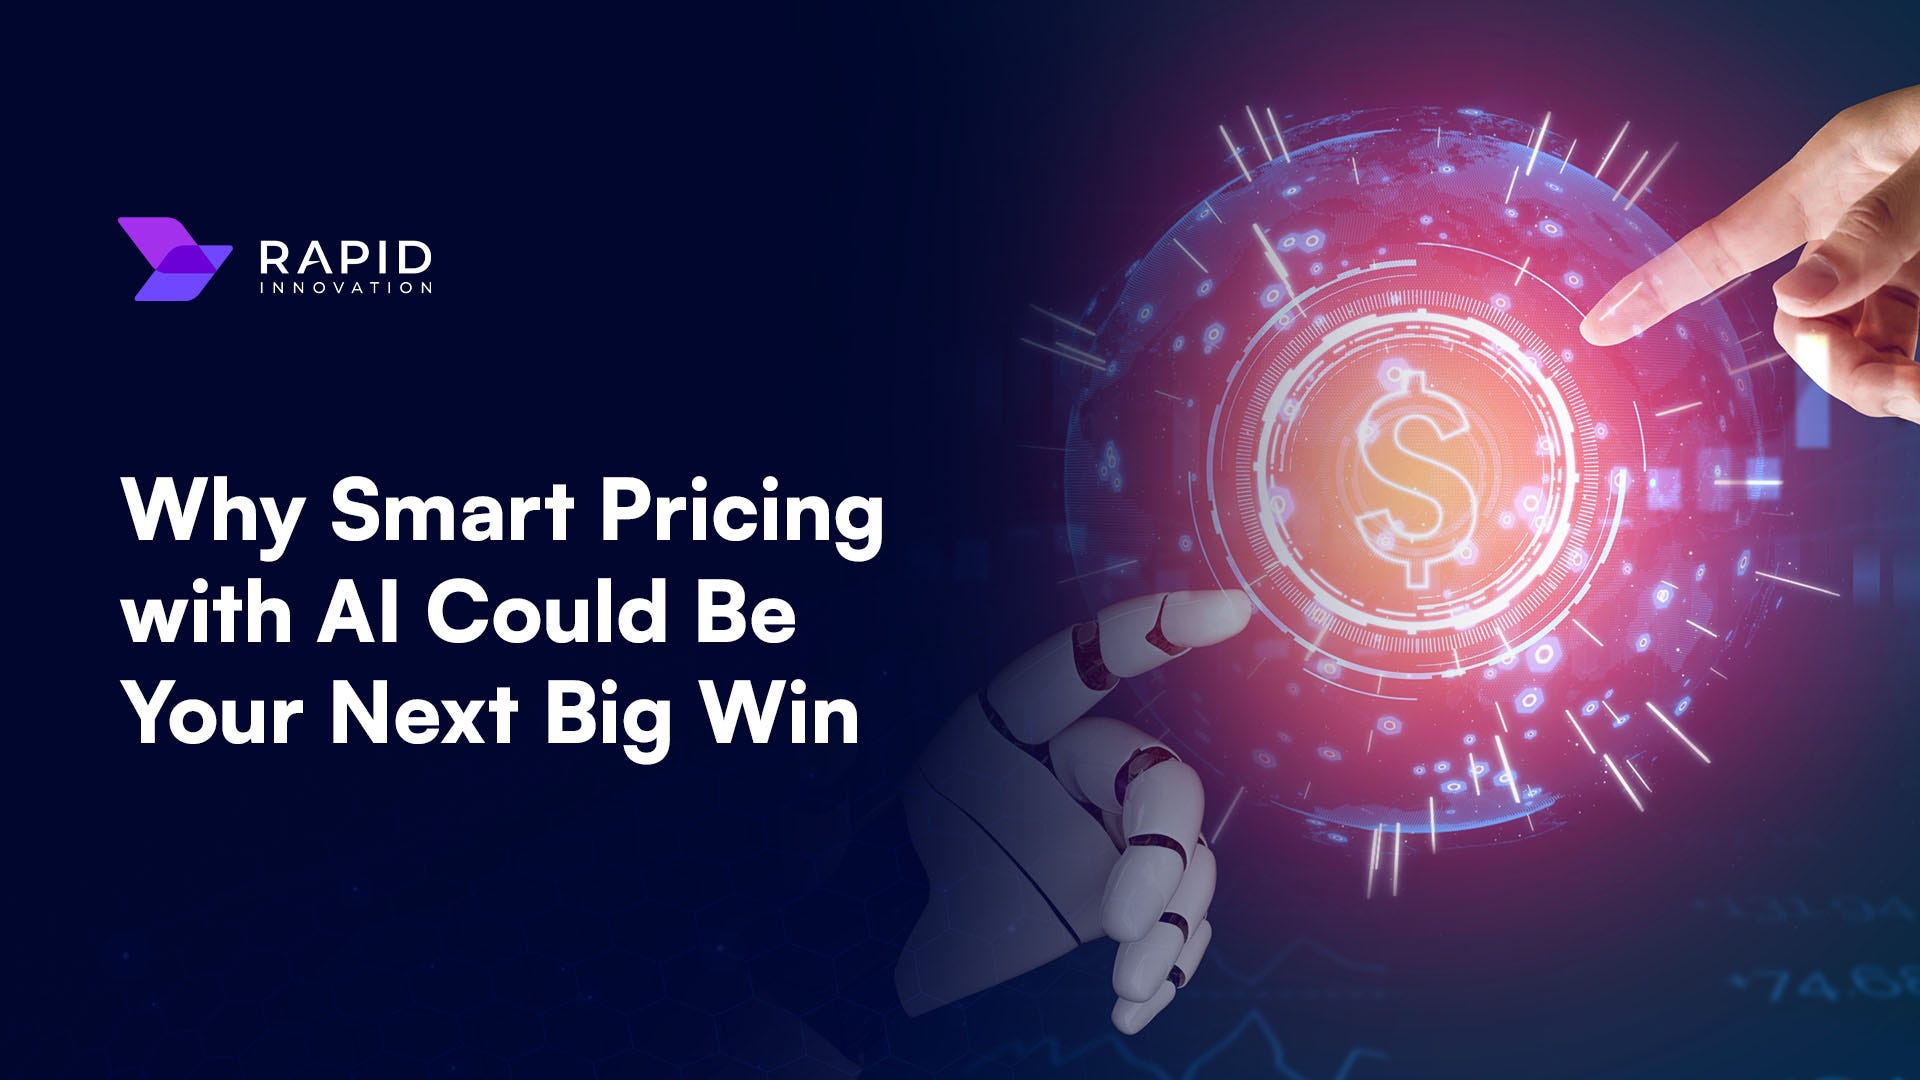 The Secret to Better Pricing? Artificial Intelligence